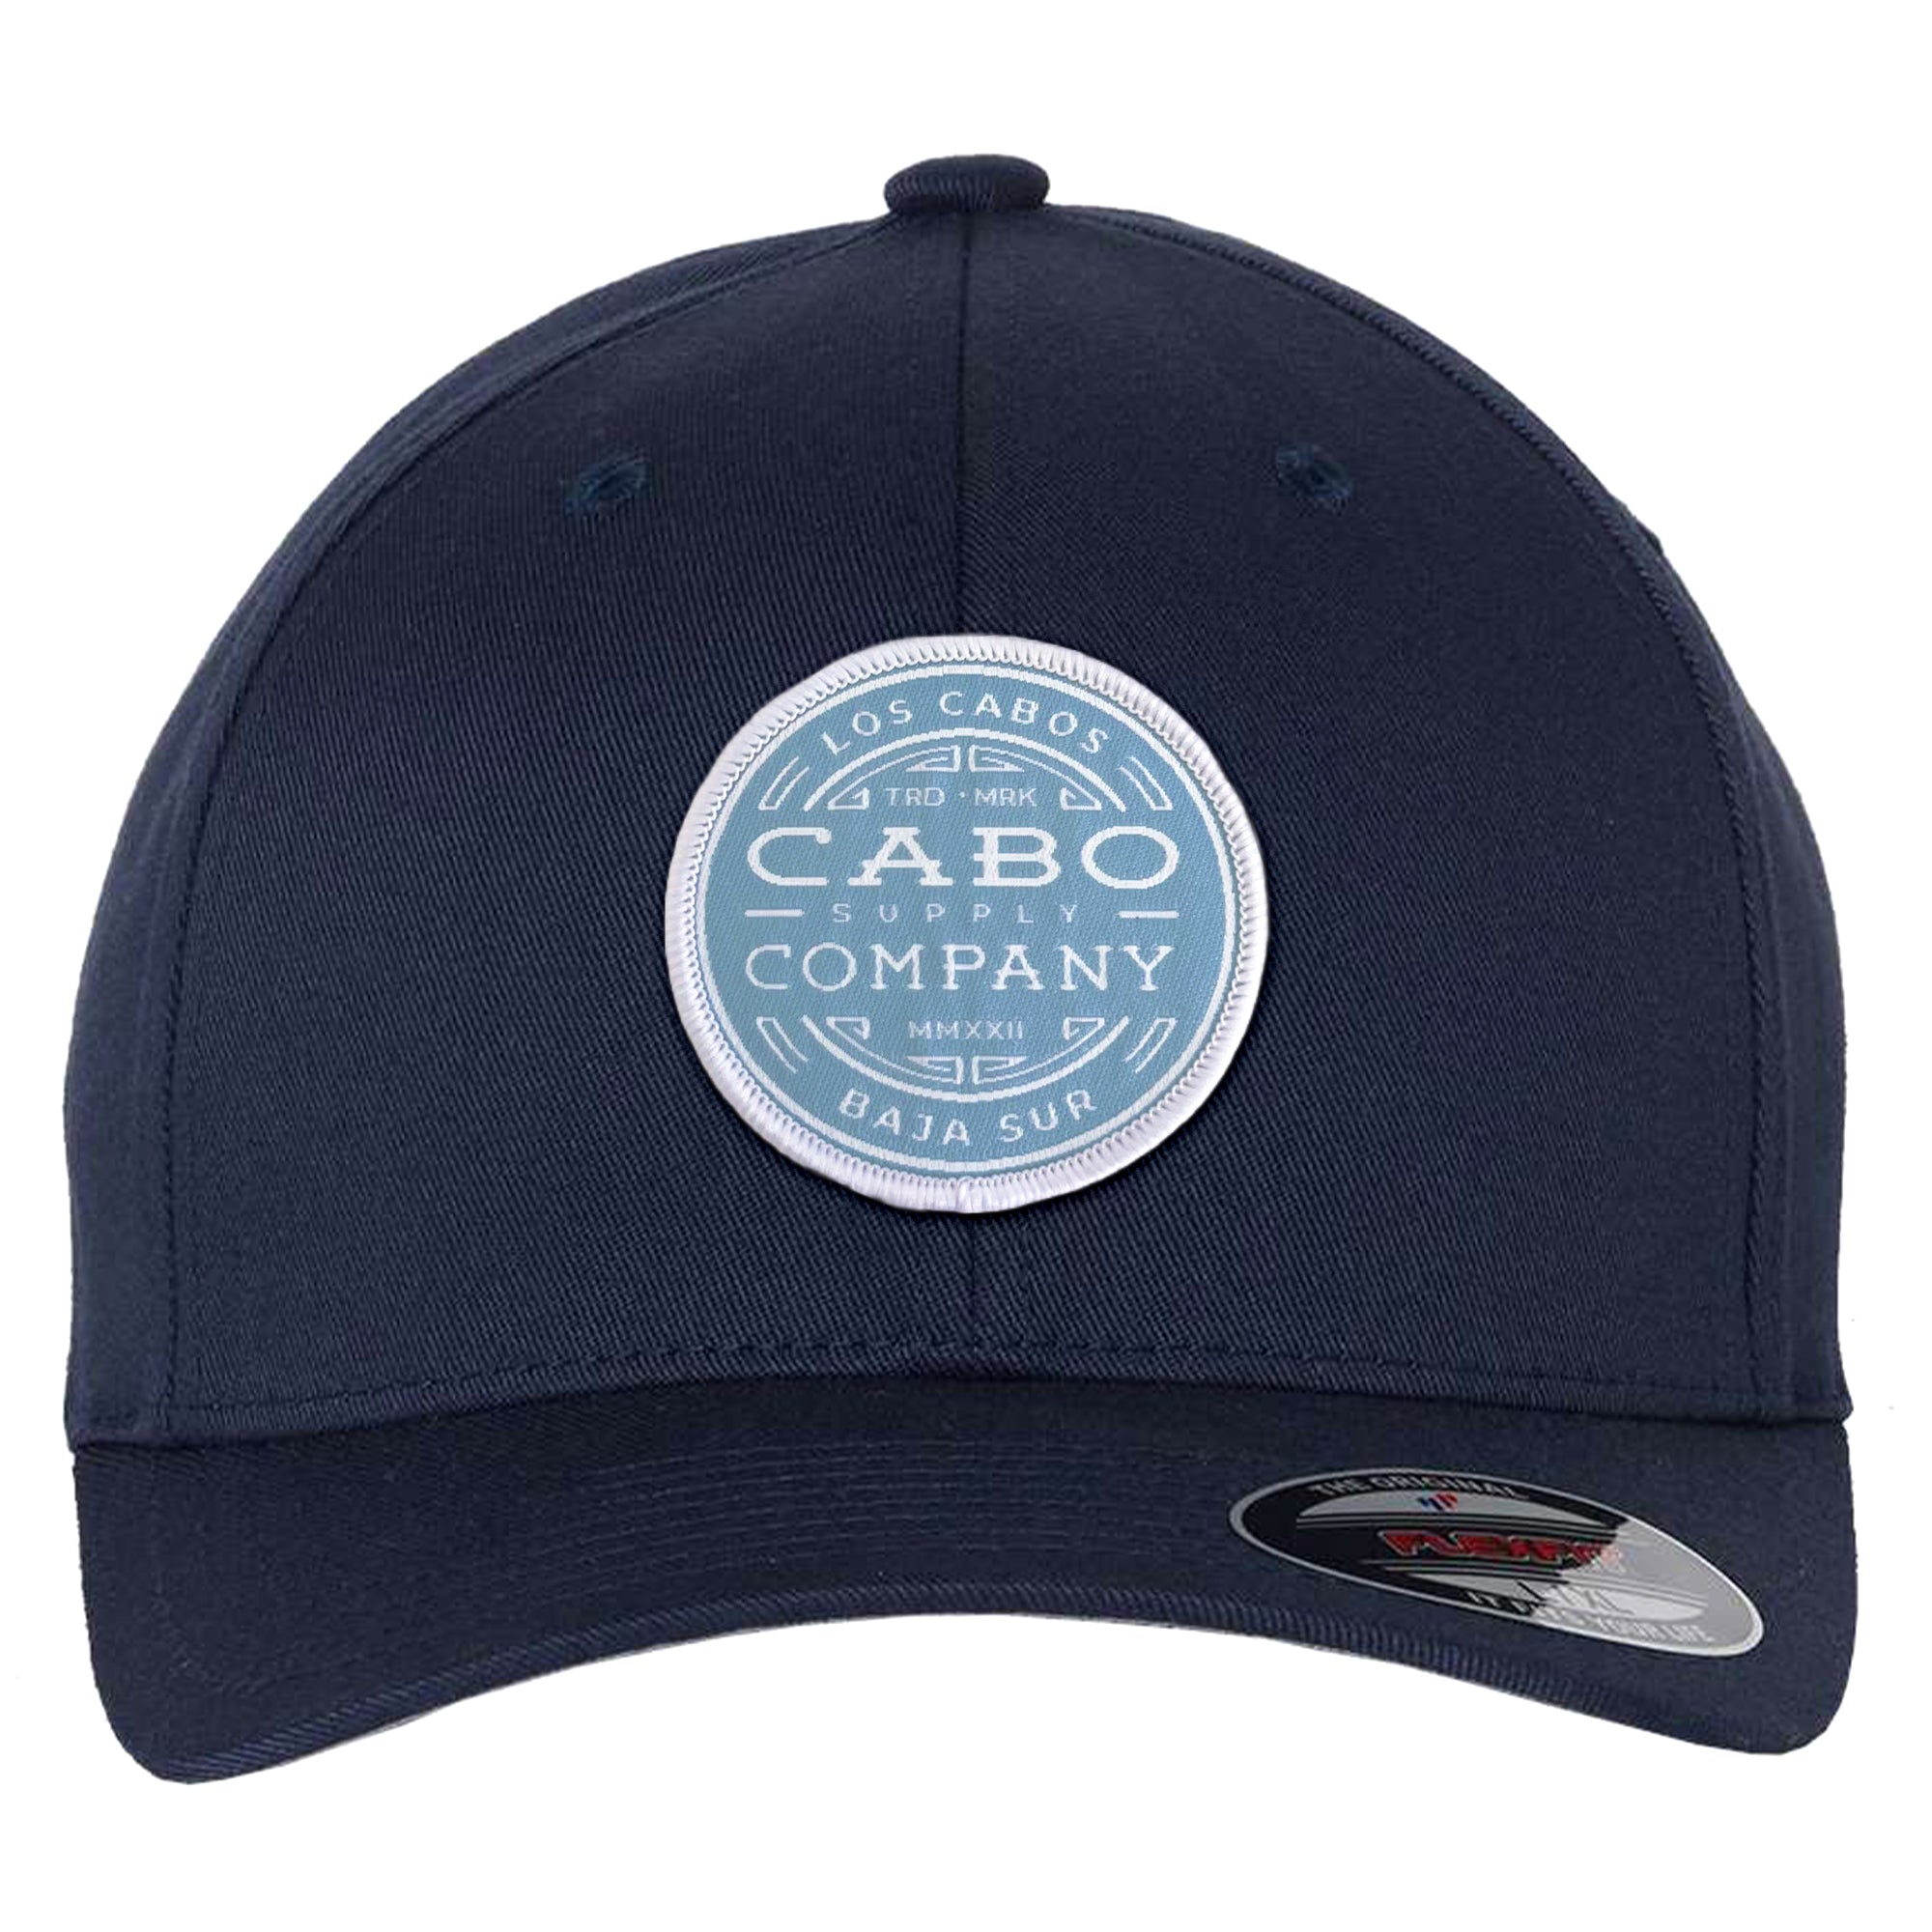 THE CABO LOCAL HAT